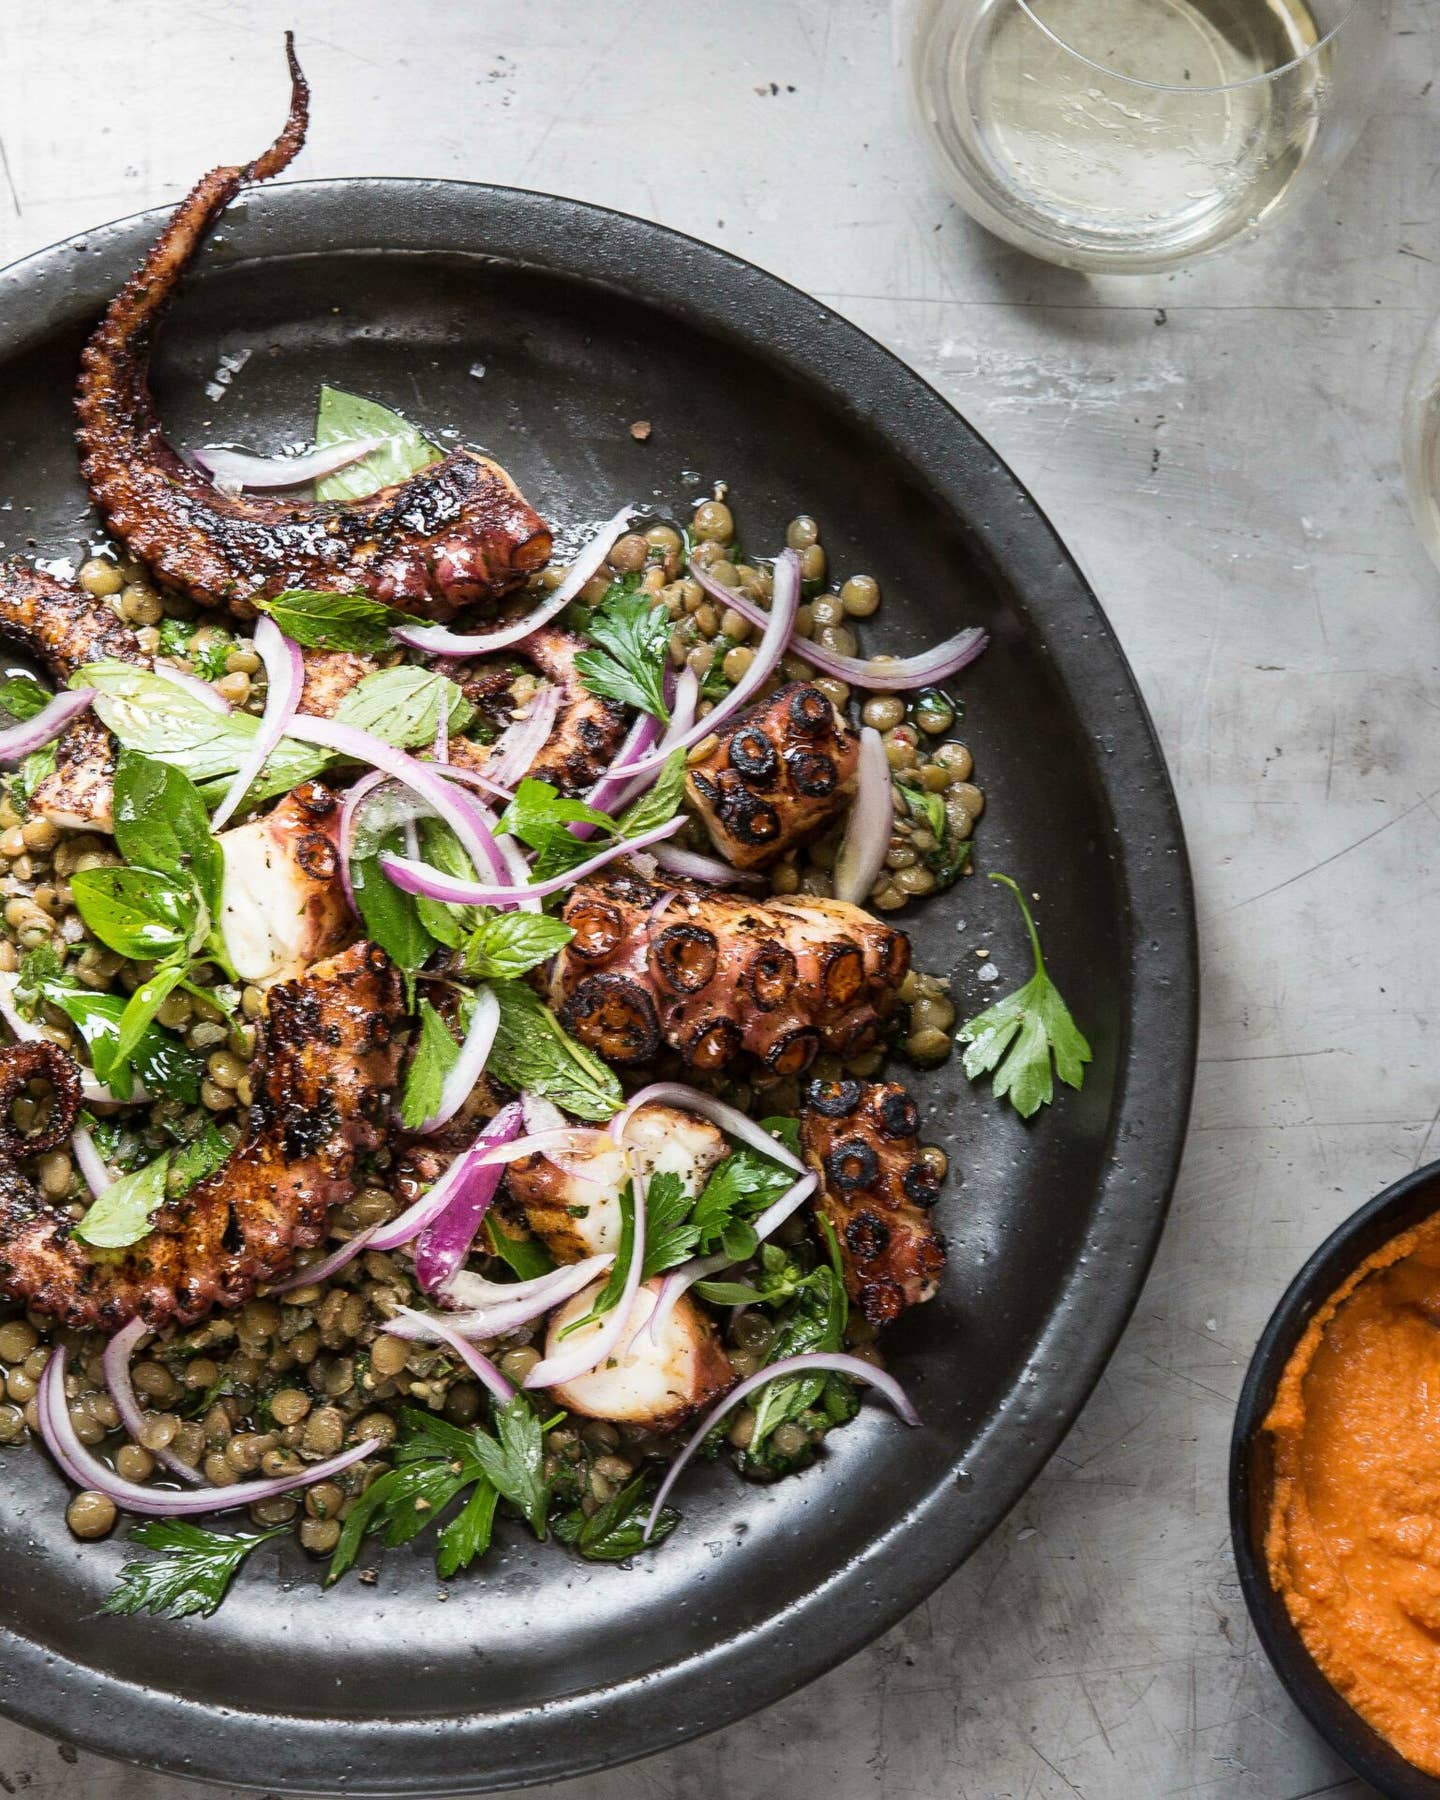 GRILLED OCTOPUS WITH GREEN LENTILS AND ROMESCO